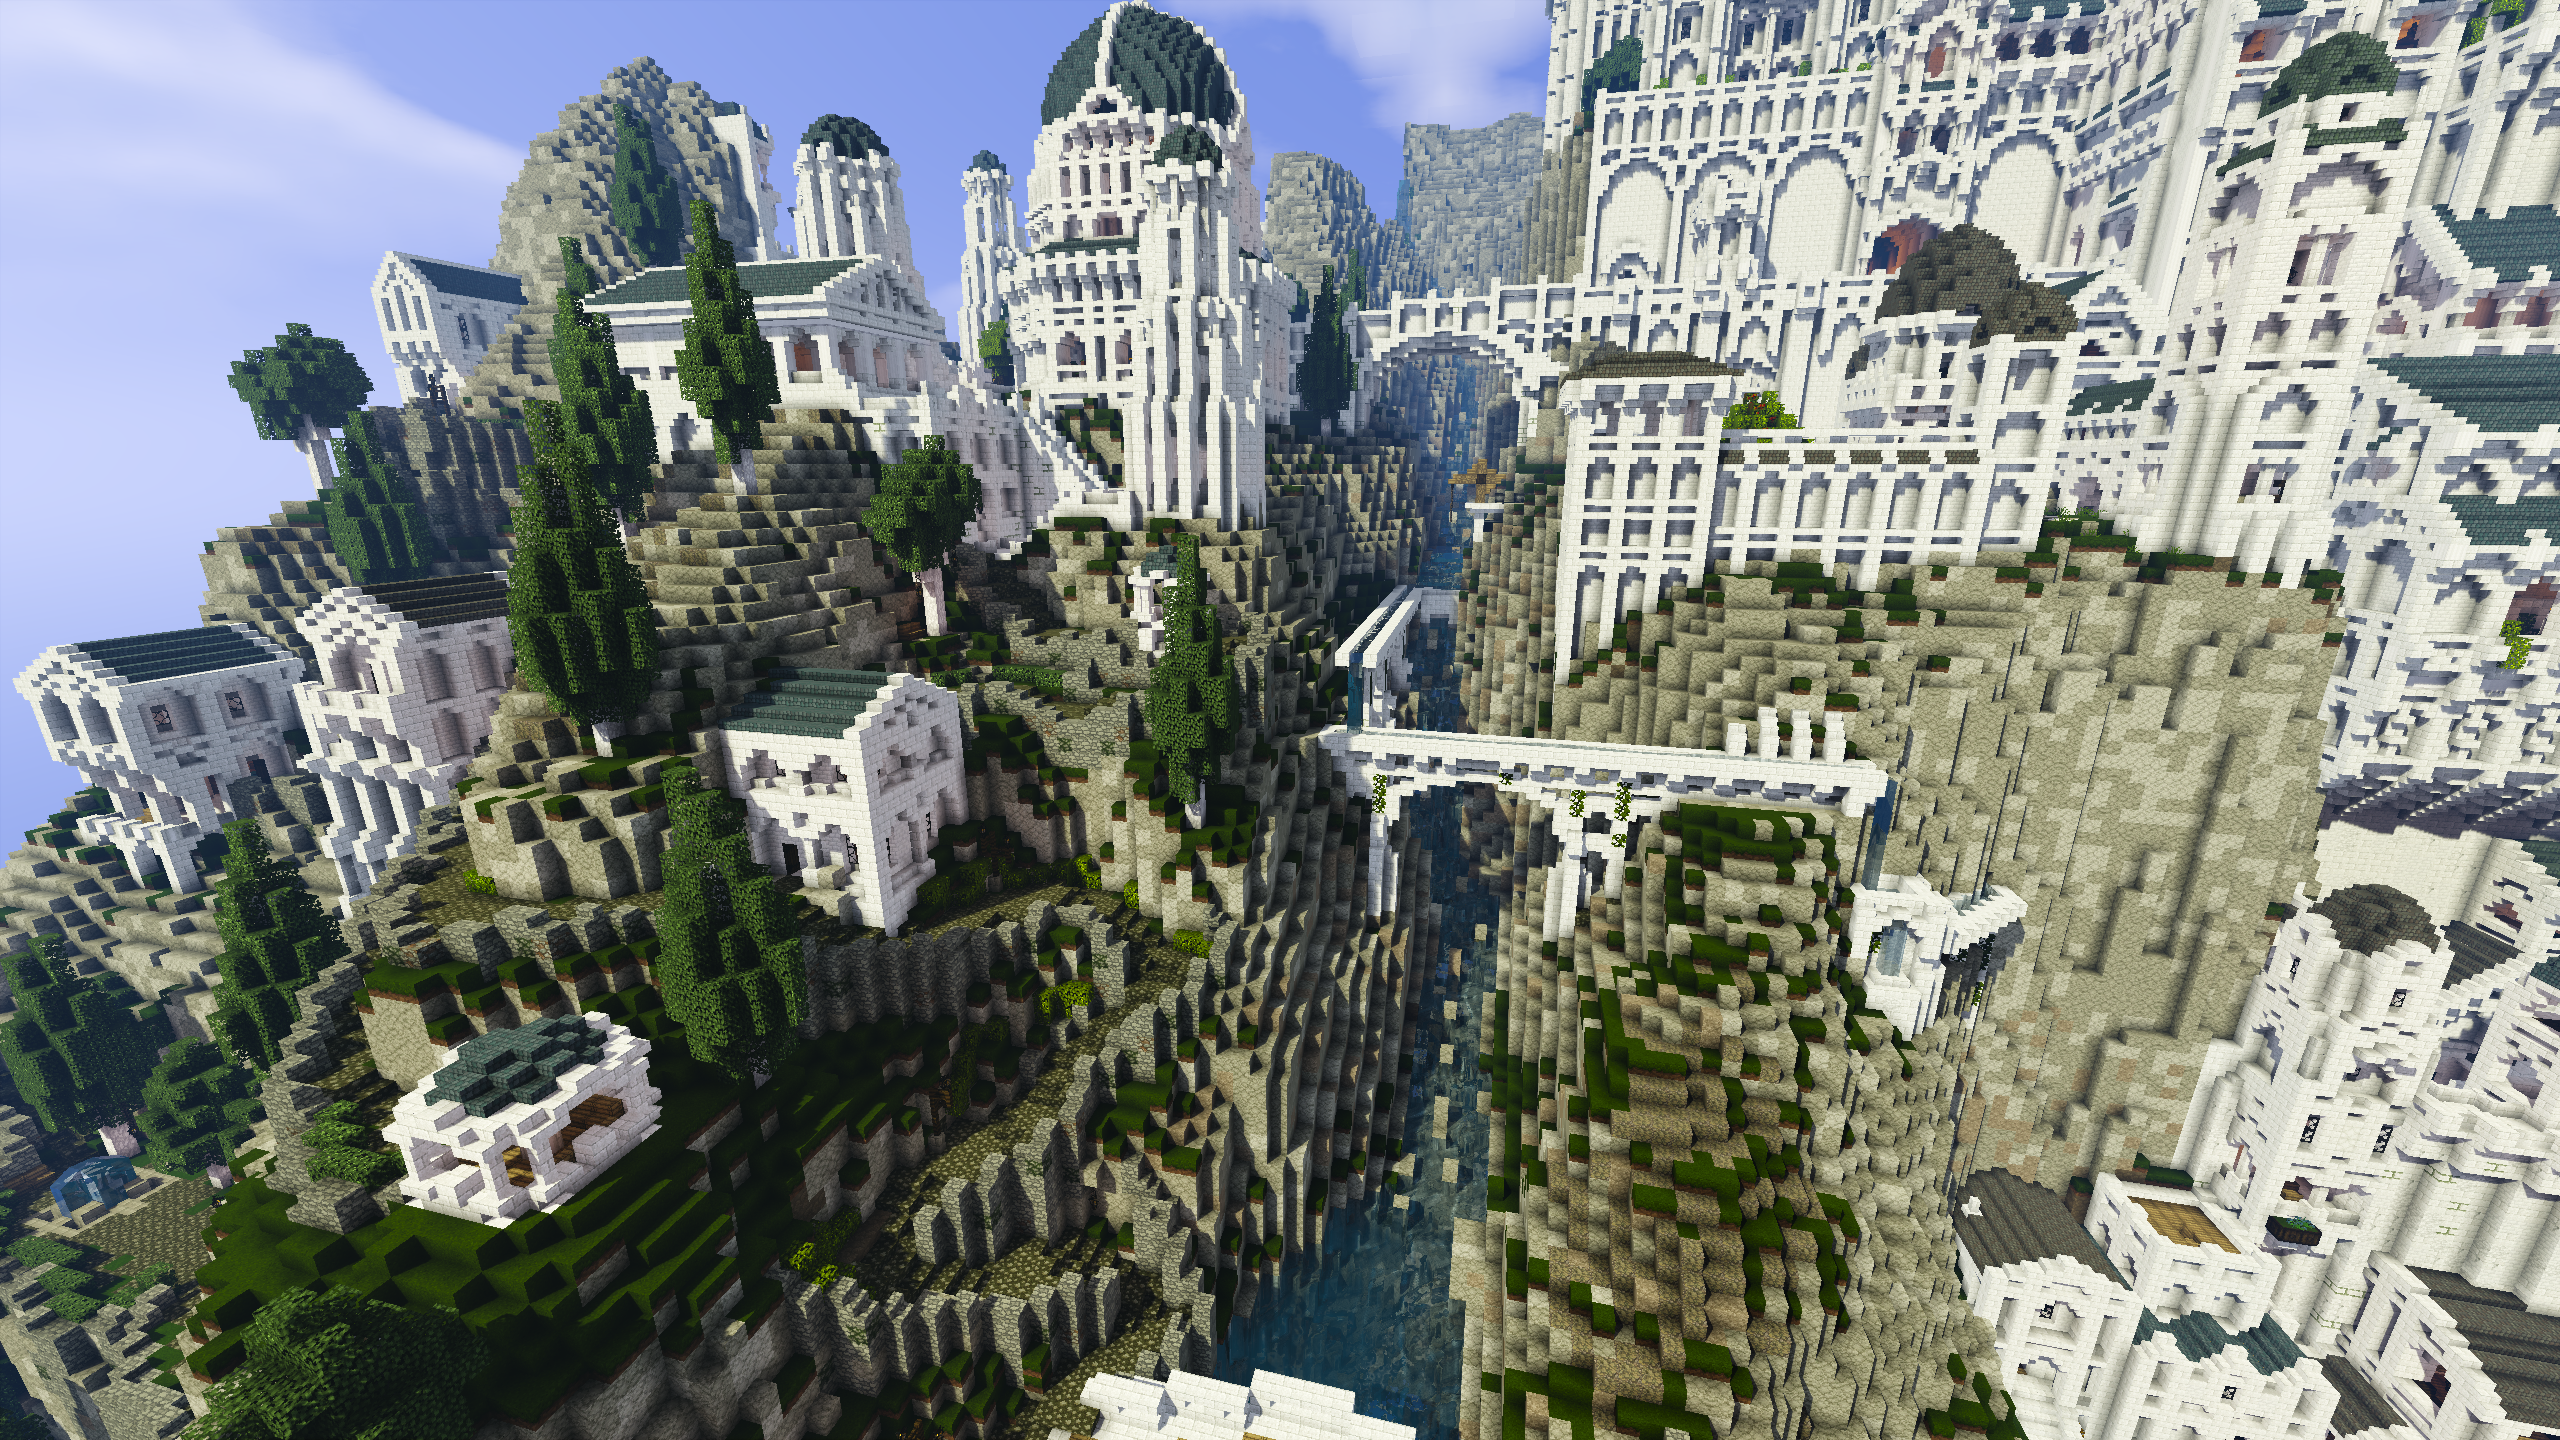 Here is Minecraft's Minas Tirith in its full ray traced splendour